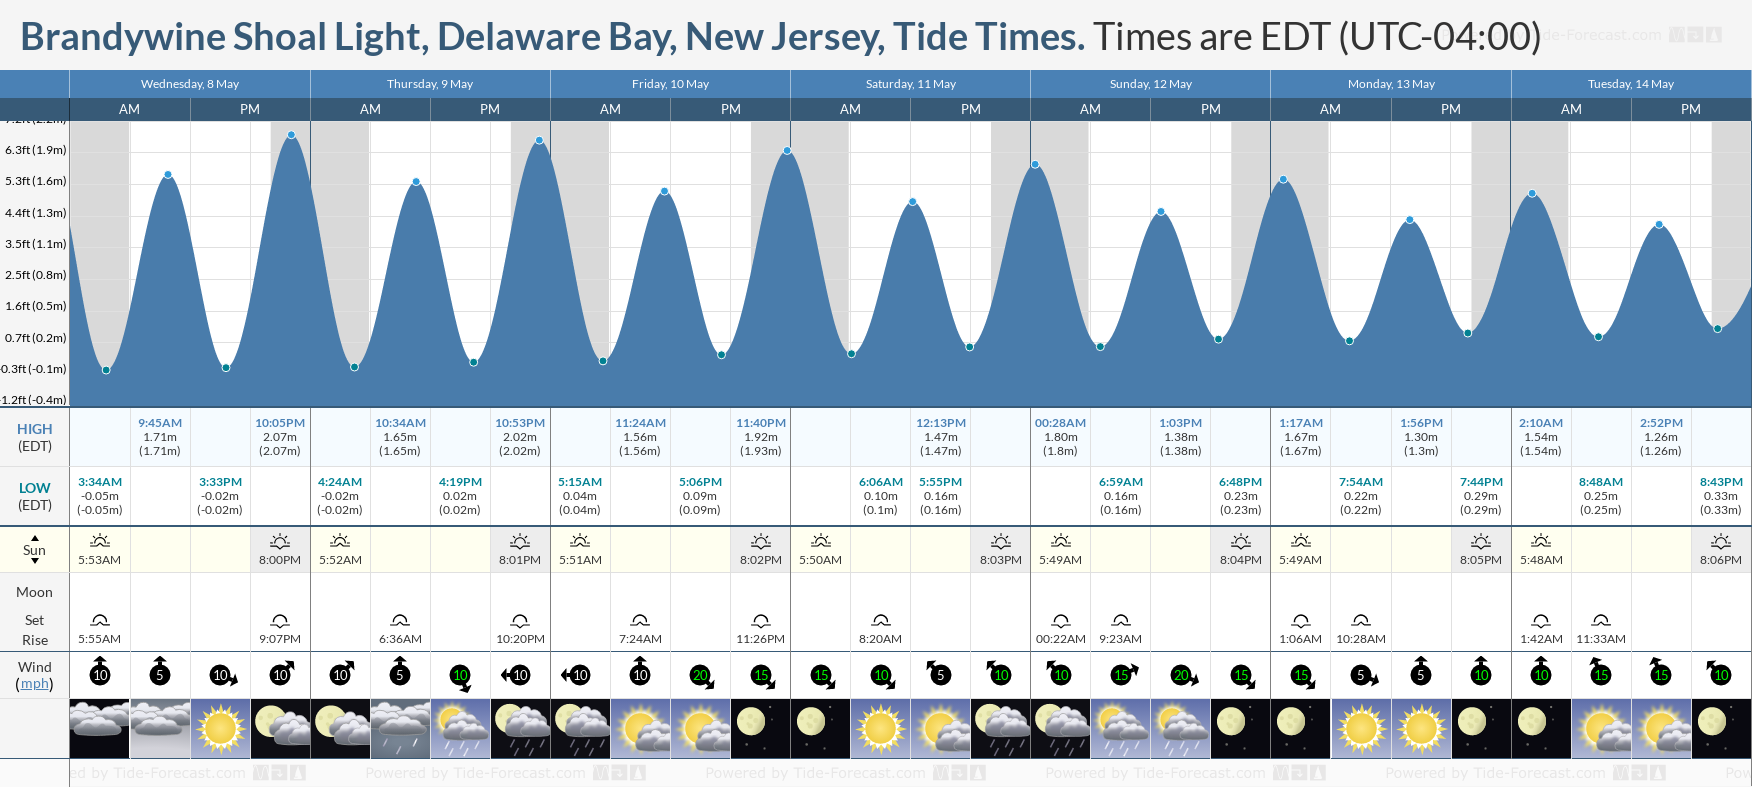 Brandywine Shoal Light, Delaware Bay, New Jersey Tide Chart including high and low tide times for the next 7 days